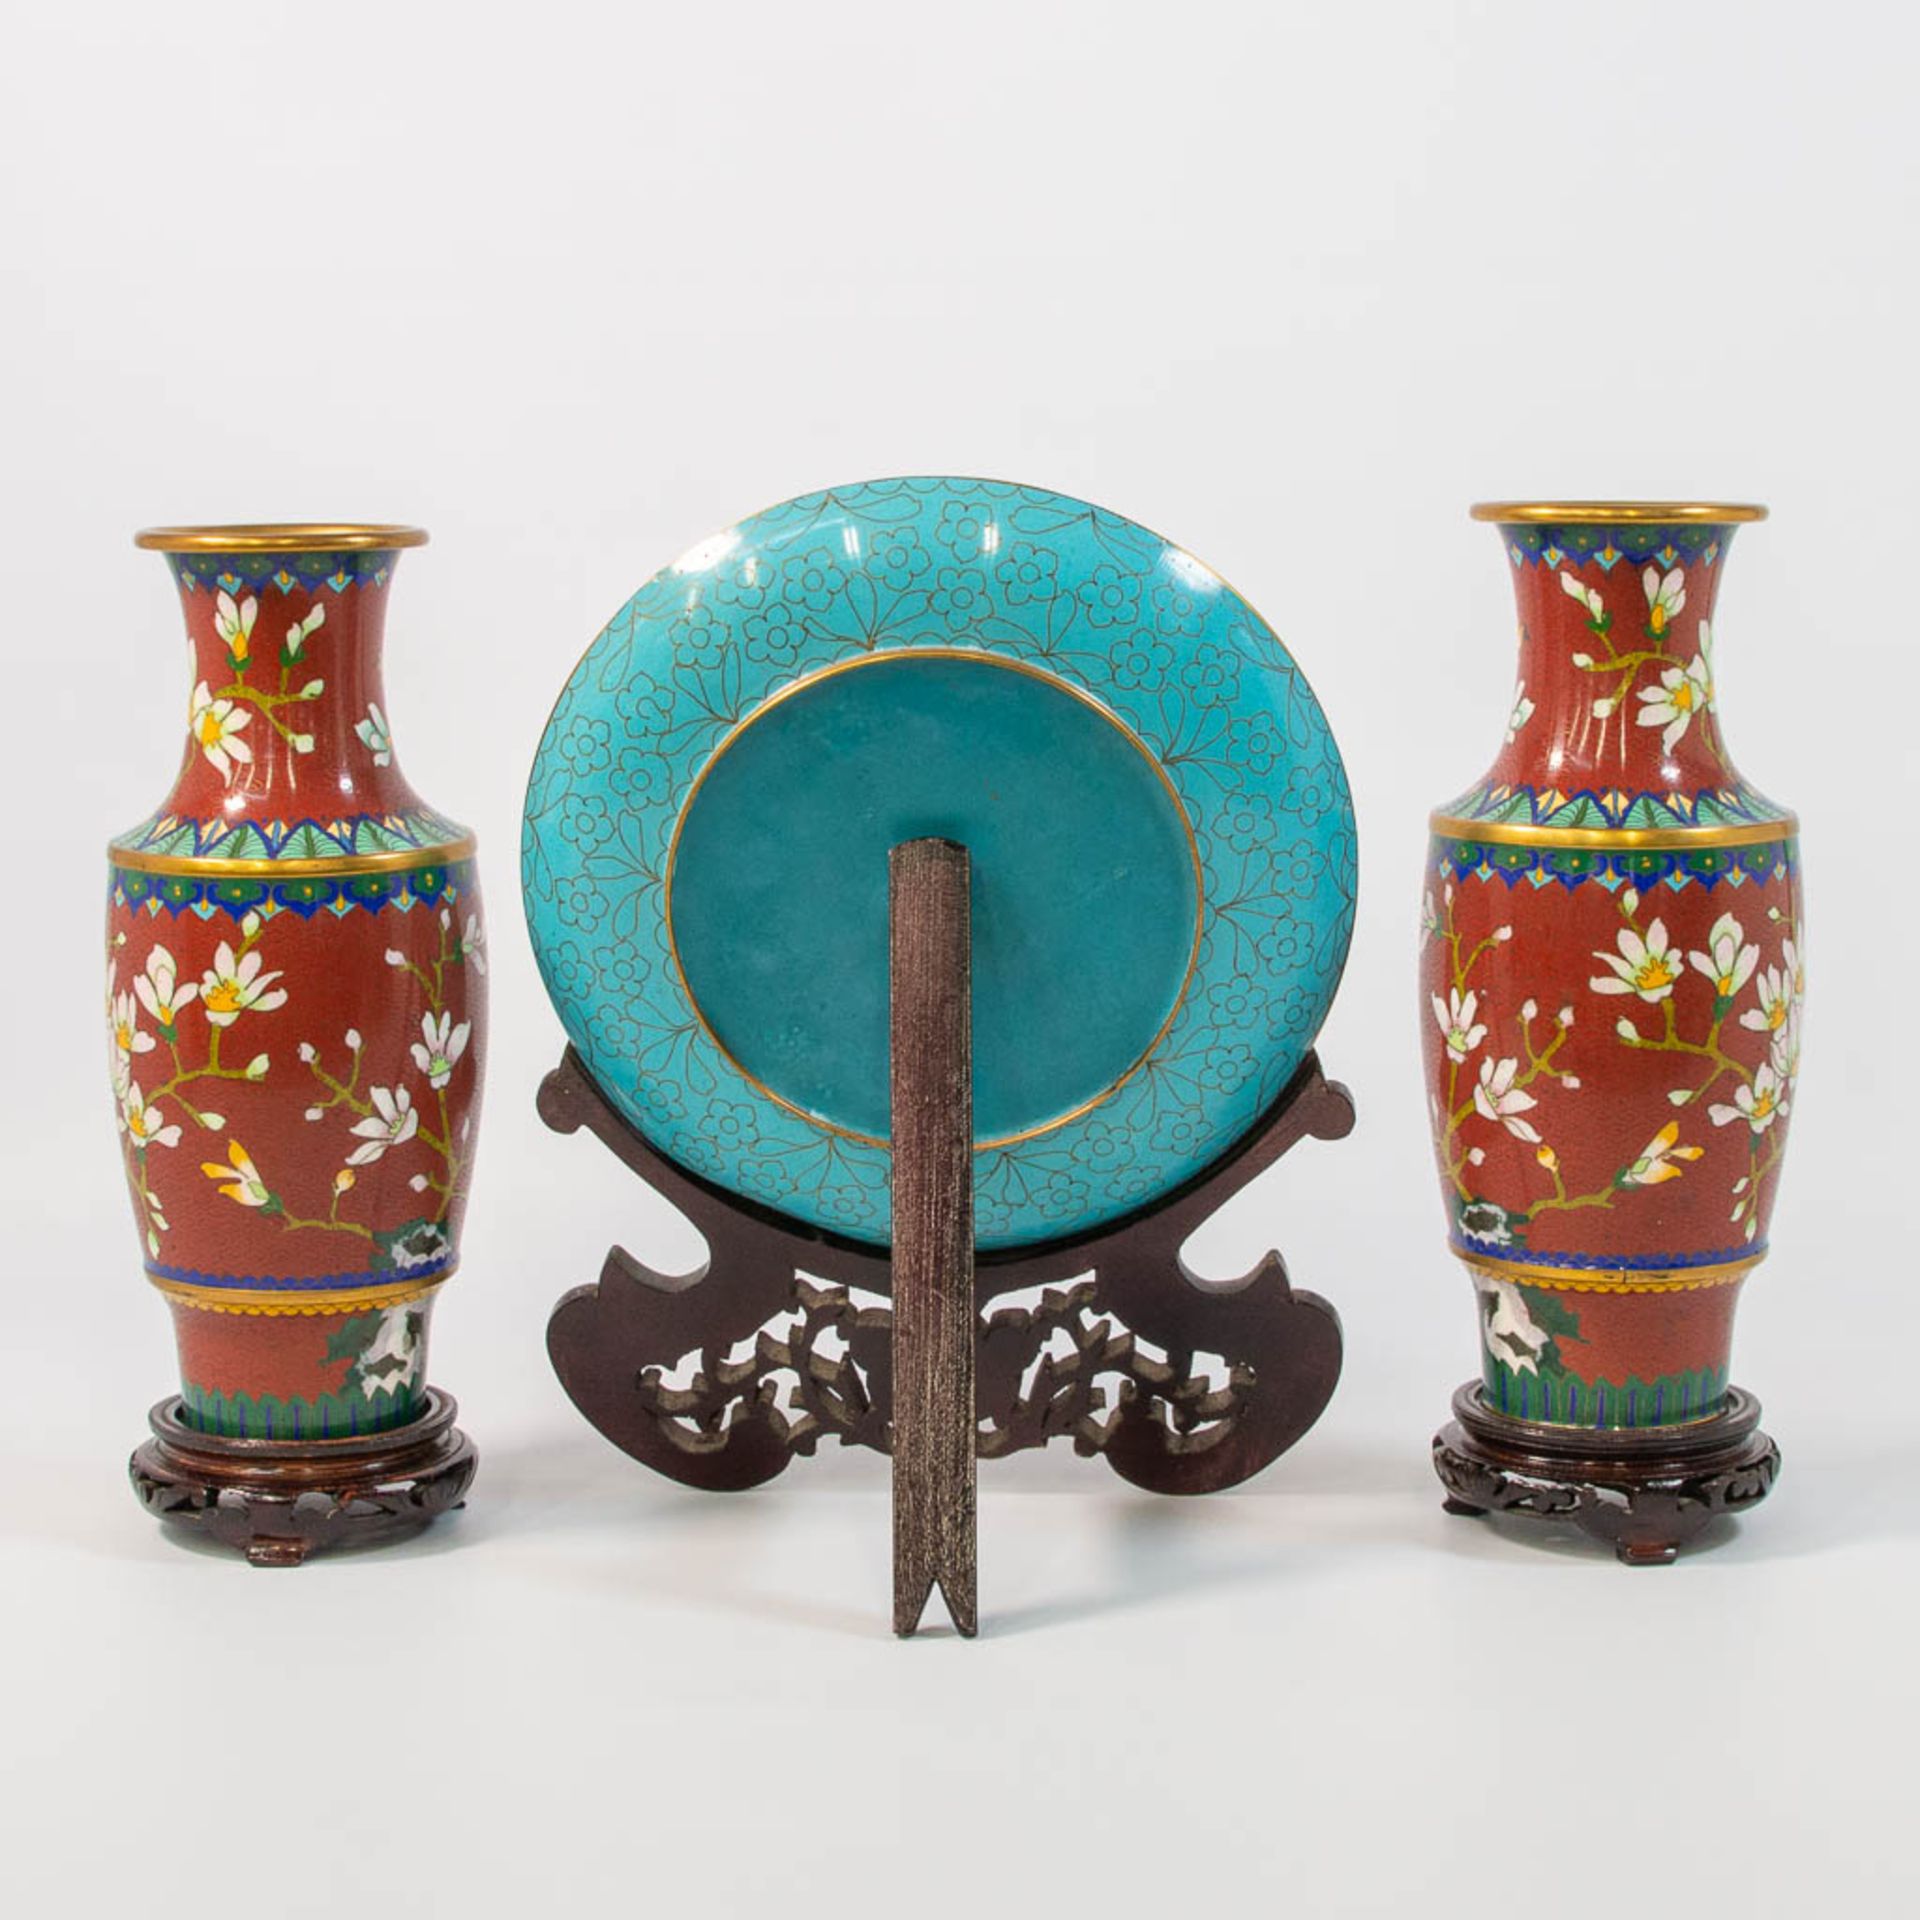 A pair of cloisonné vases and display plate on wood stands. Made of bronze and enamel. - Image 5 of 10